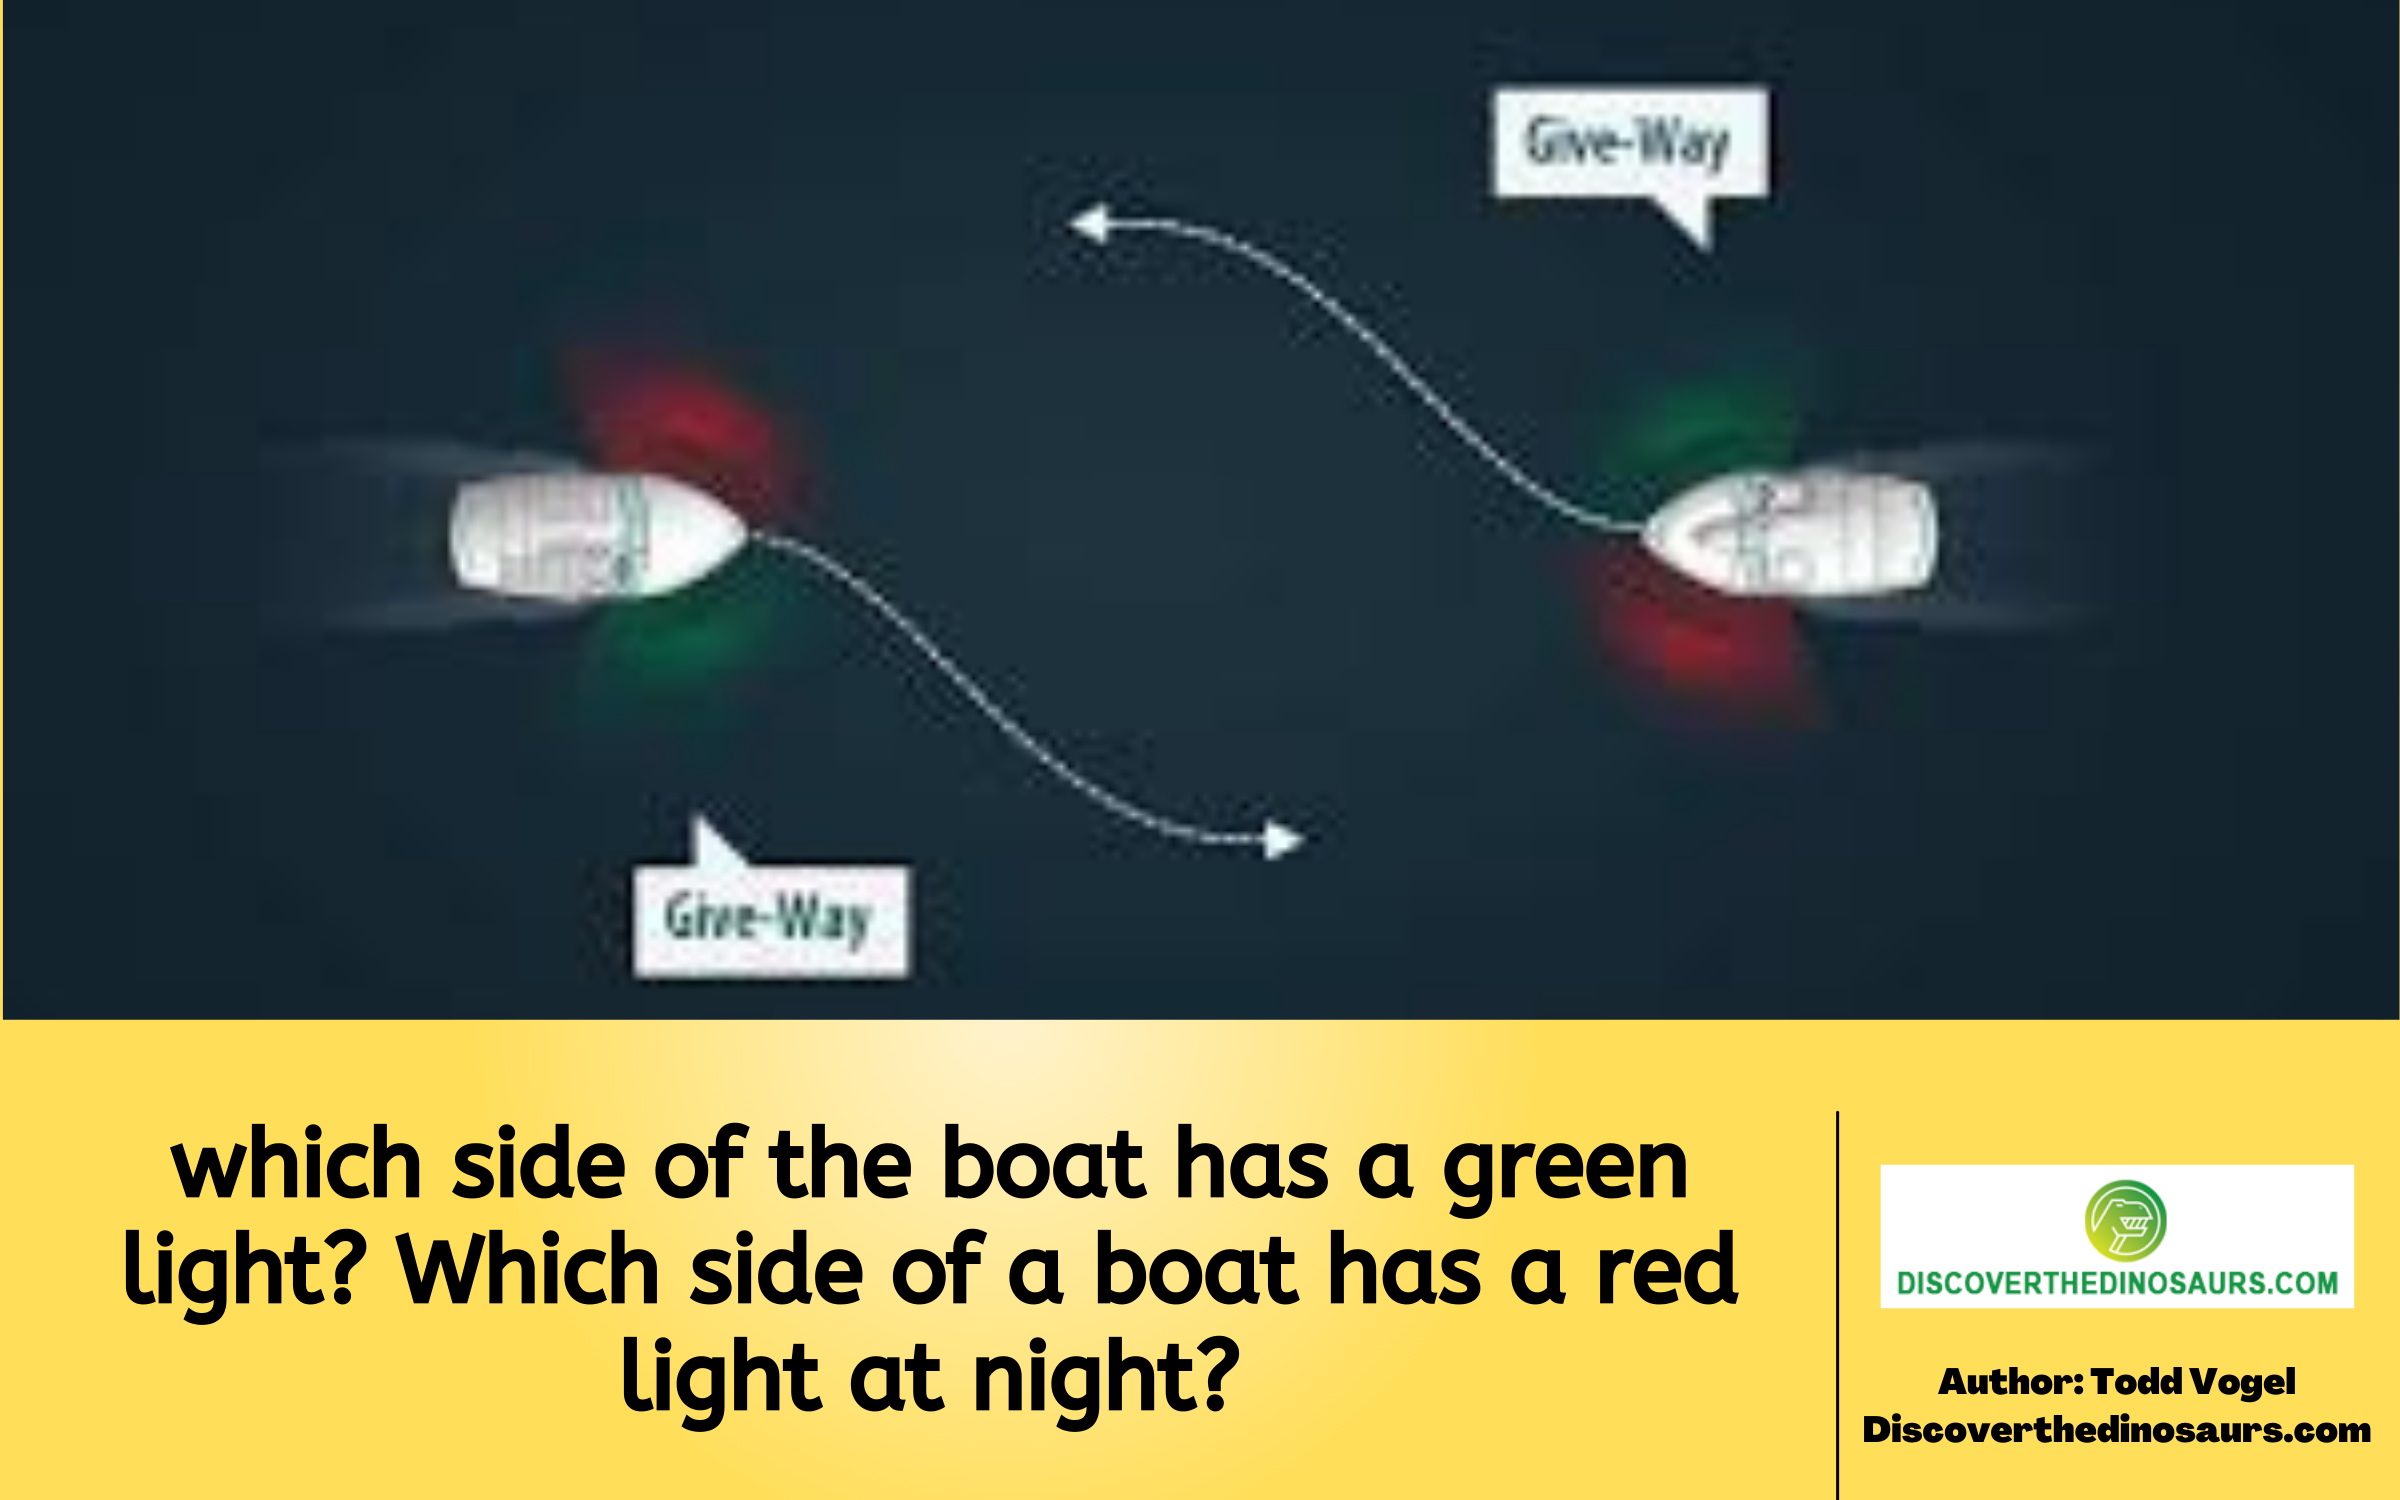 which side of the boat has a green light